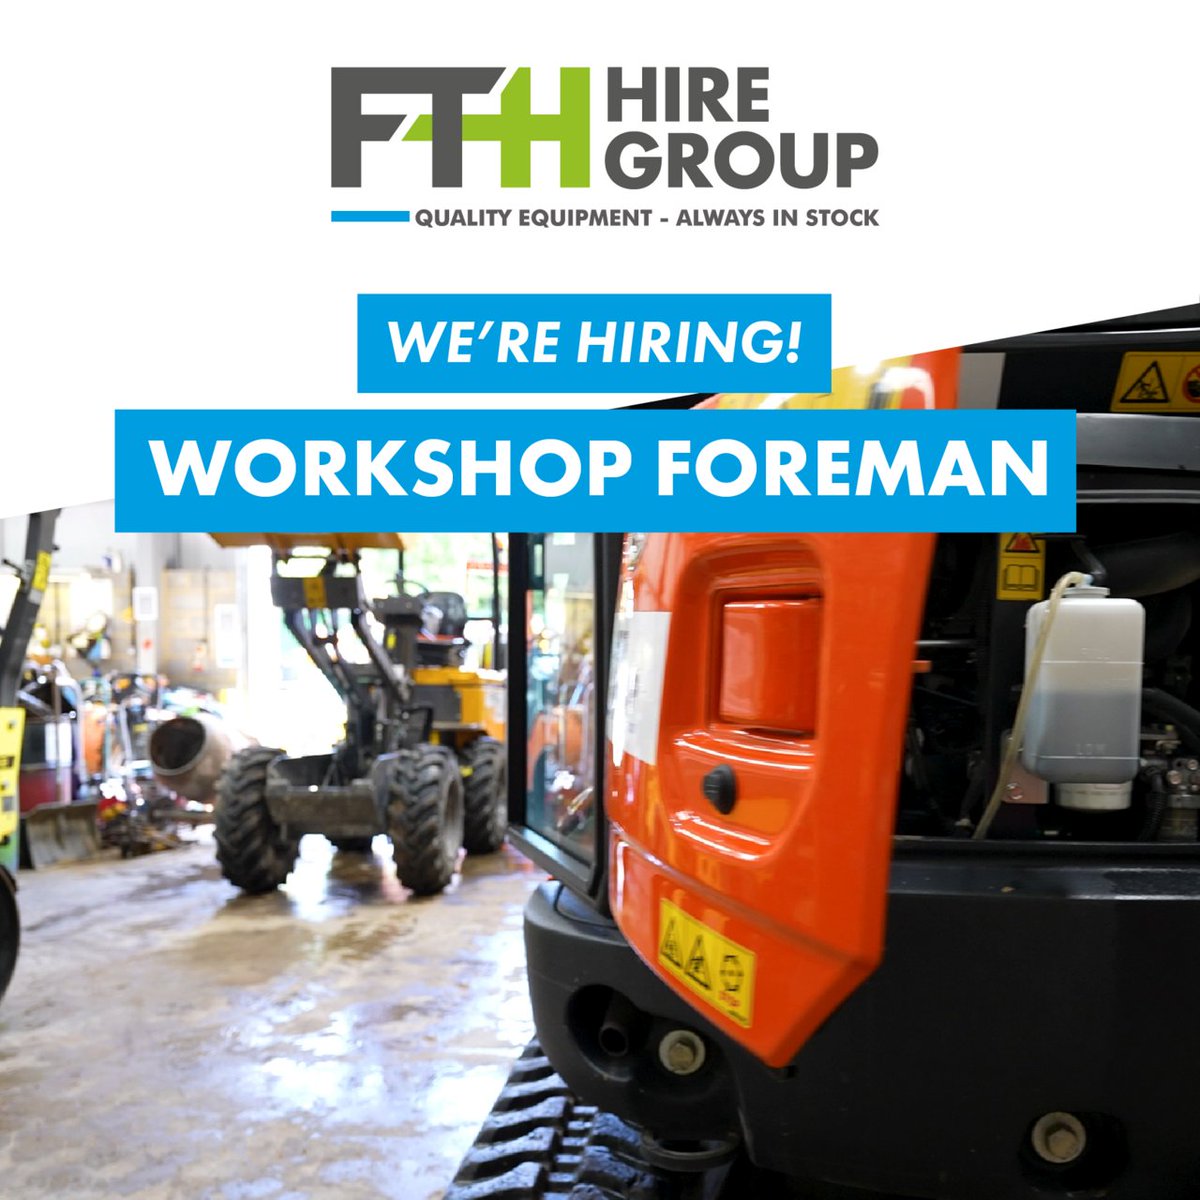 We are recruiting for a Workshop Foreman role at our Guildford Hire Hub, to join our growing business. 

Please apply to:
✉️ hr@fthhiregroup.co.uk

#guildford #workshopforeman #workshopjobs #guildfordjobs #guildfordrecruitment